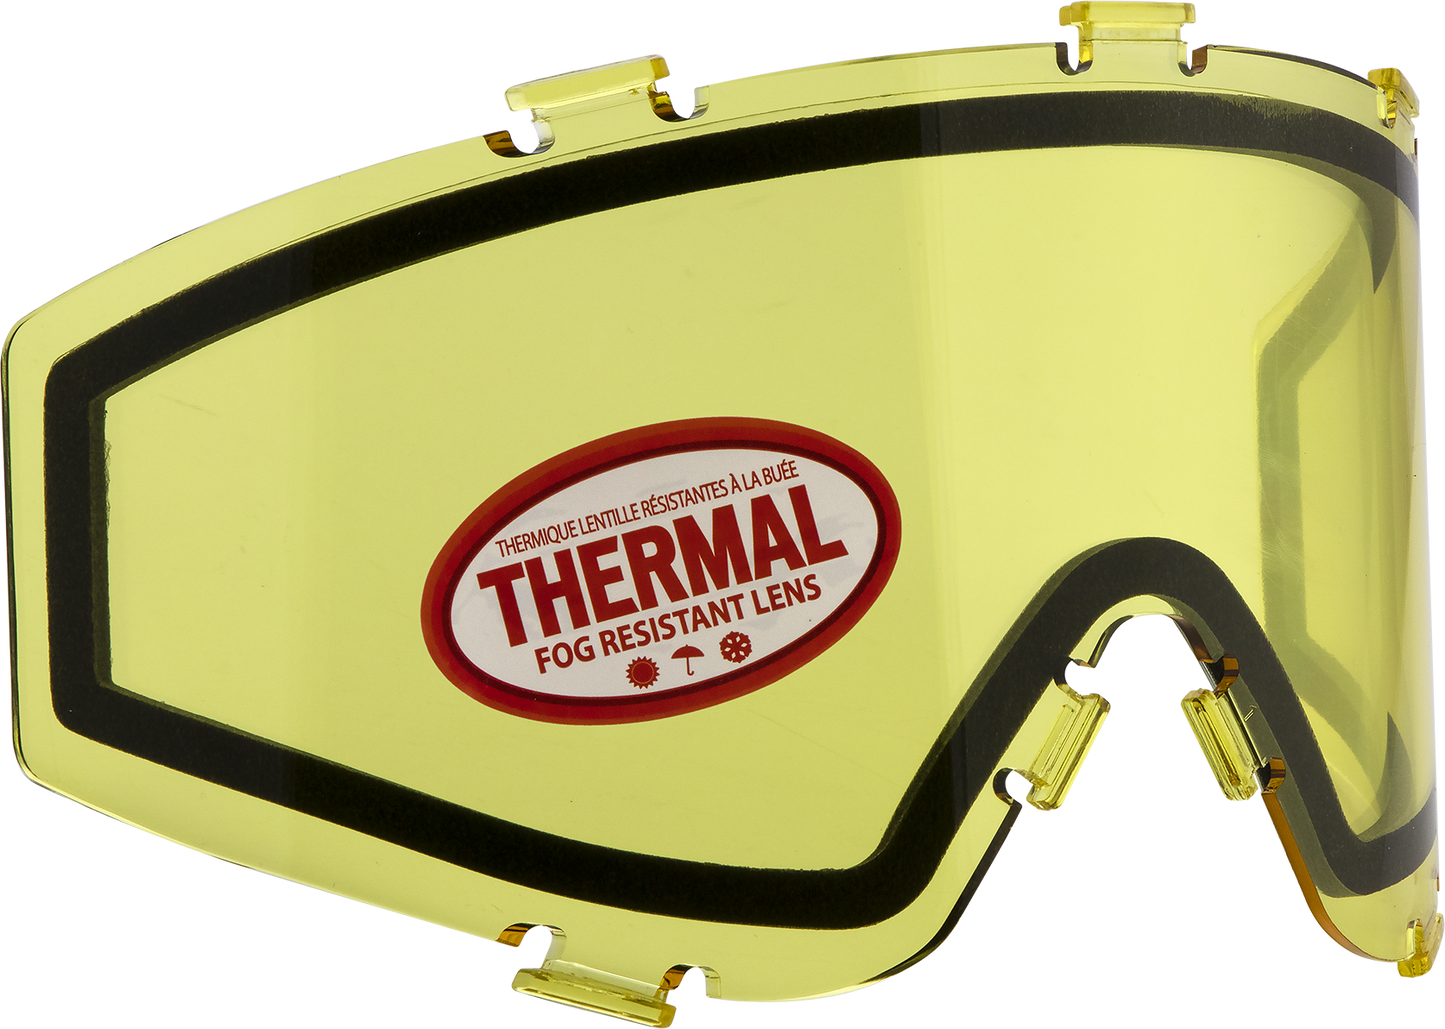 JT Spectra Lens - Thermal Yellow